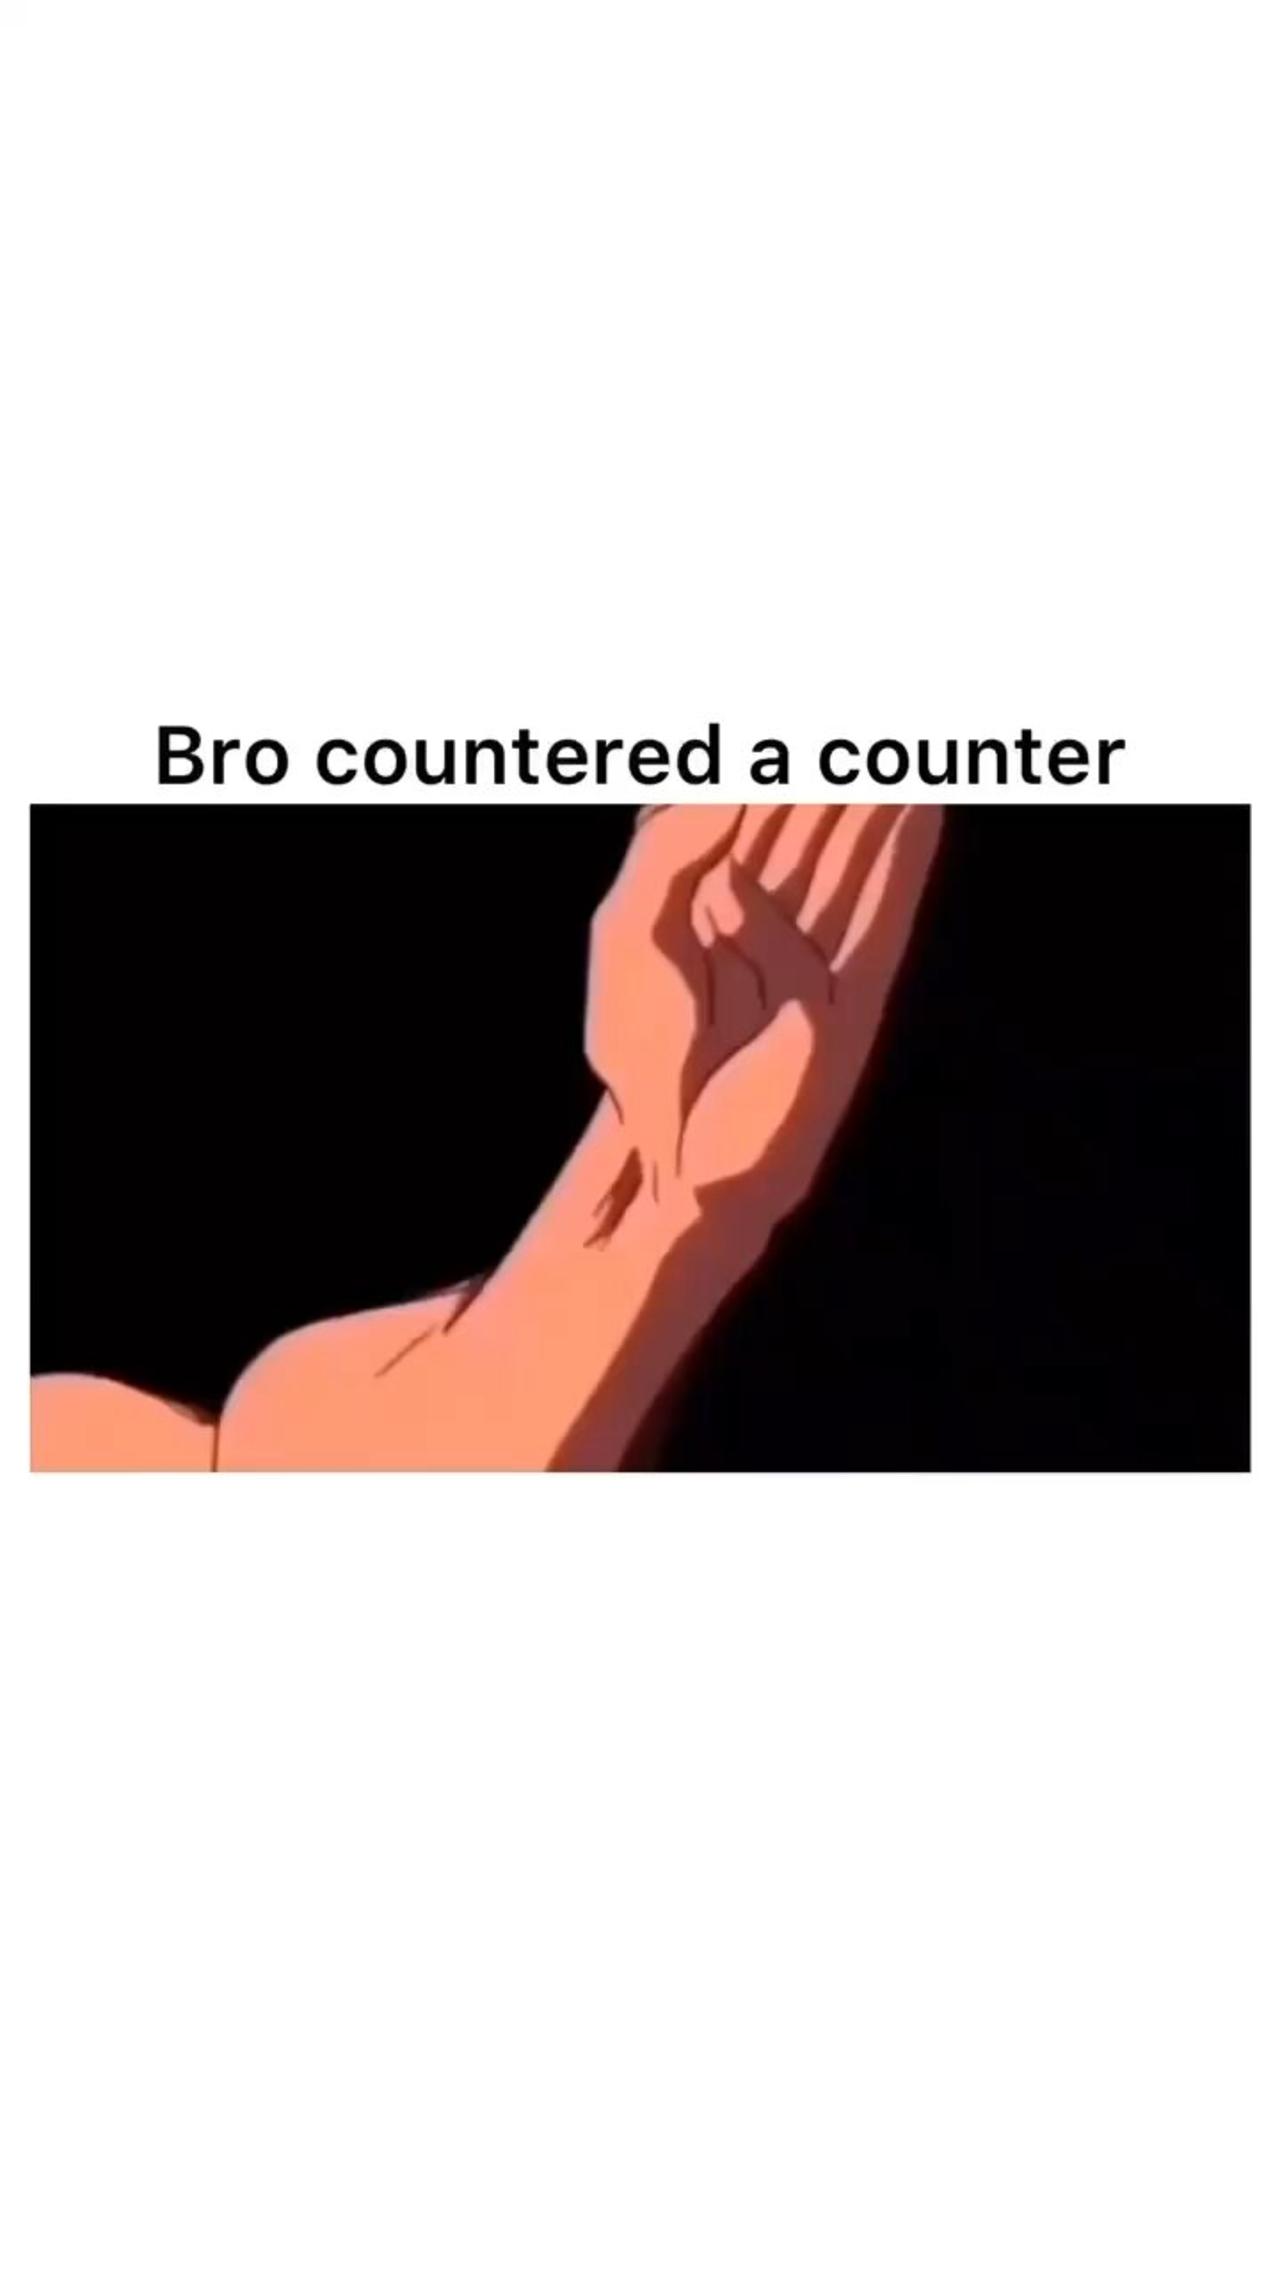 Bro rlly counted a counter